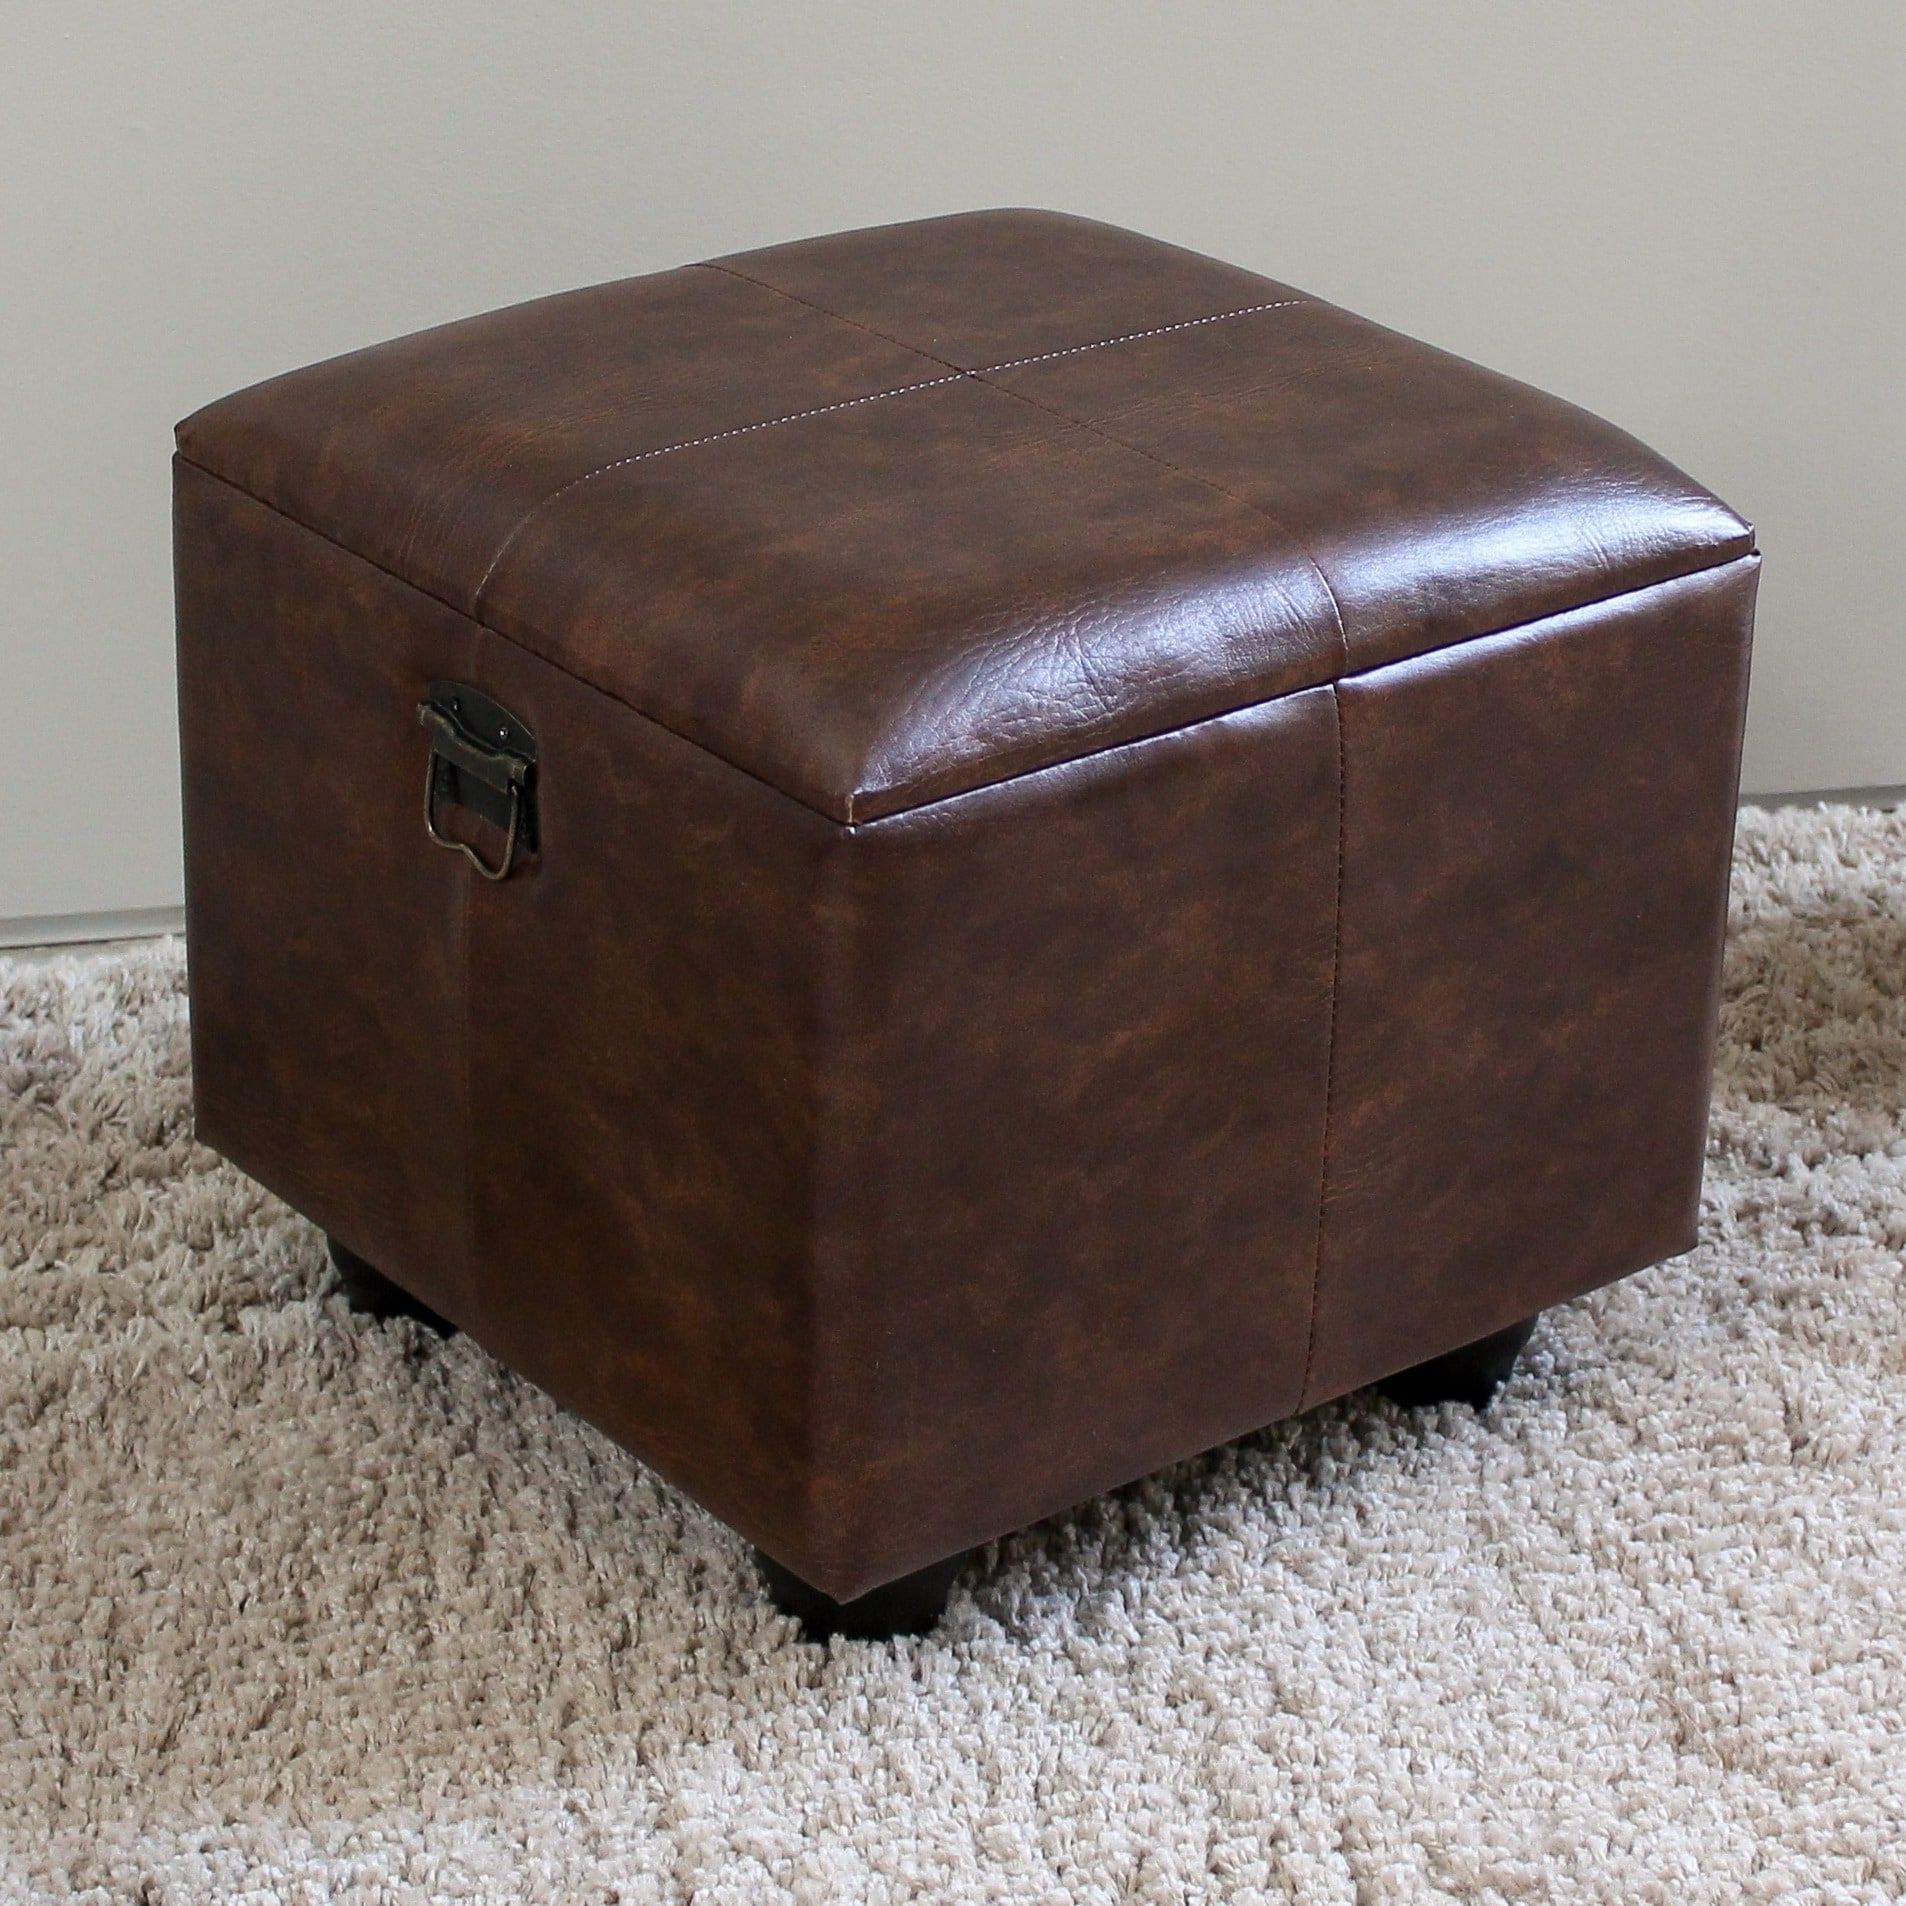 International Caravan Carmel Square Storage Ottoman | Ebay Within Gold Faux Leather Ottomans With Pull Tab (View 19 of 20)